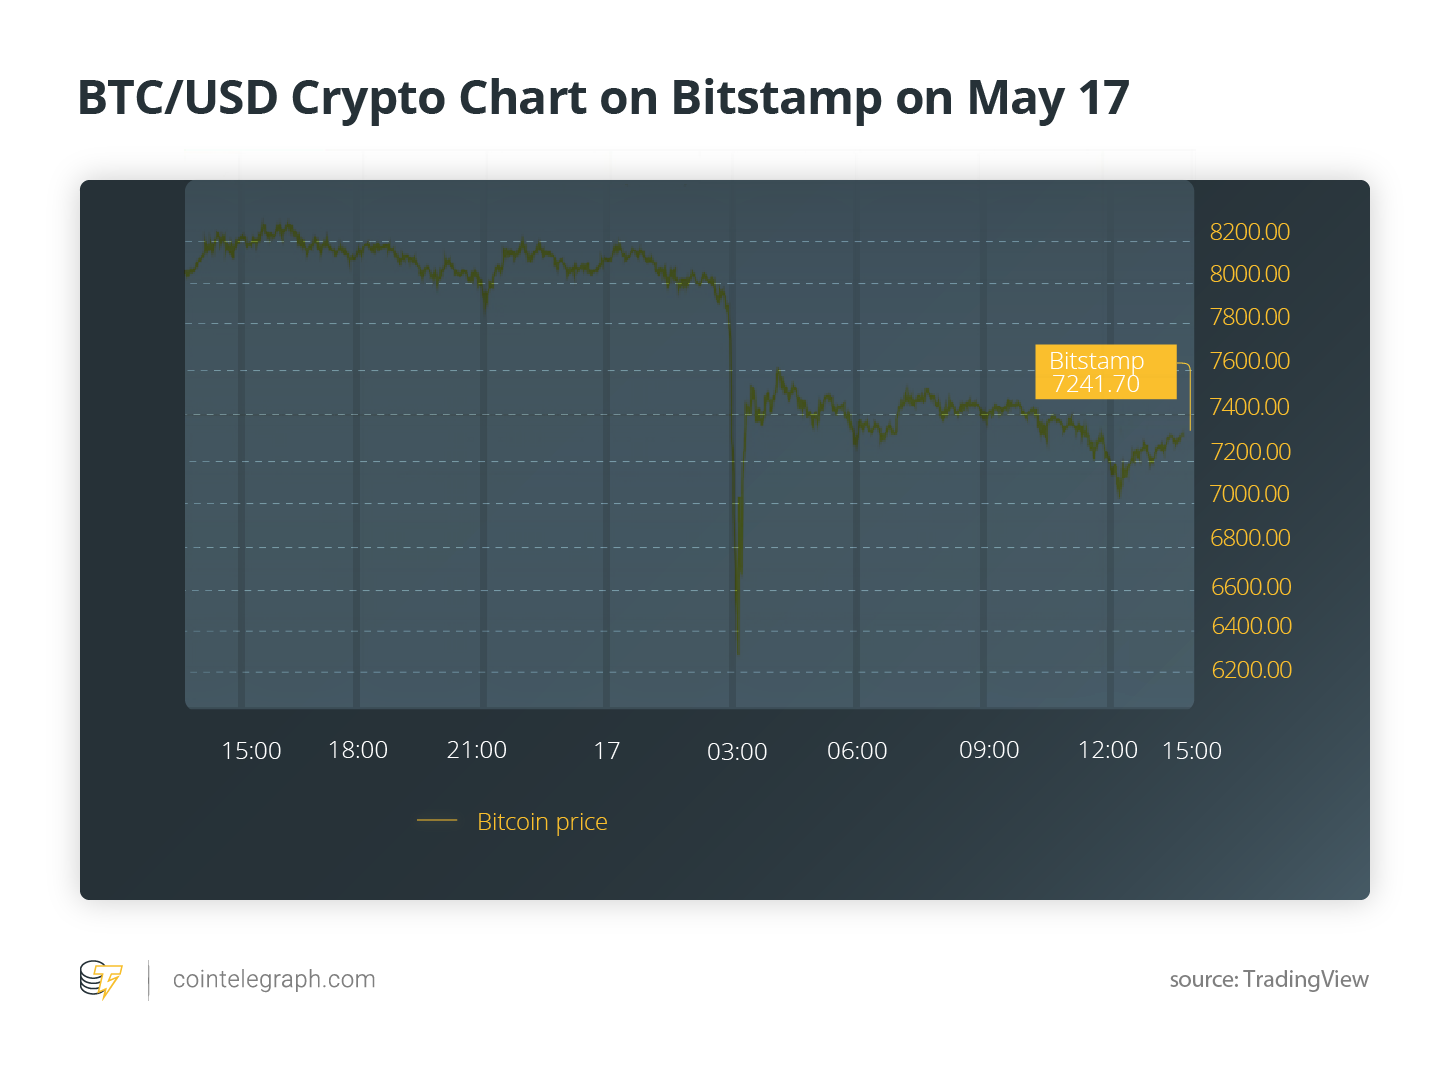 BTC/USD Crypto Chart on Bitstamp on May 17